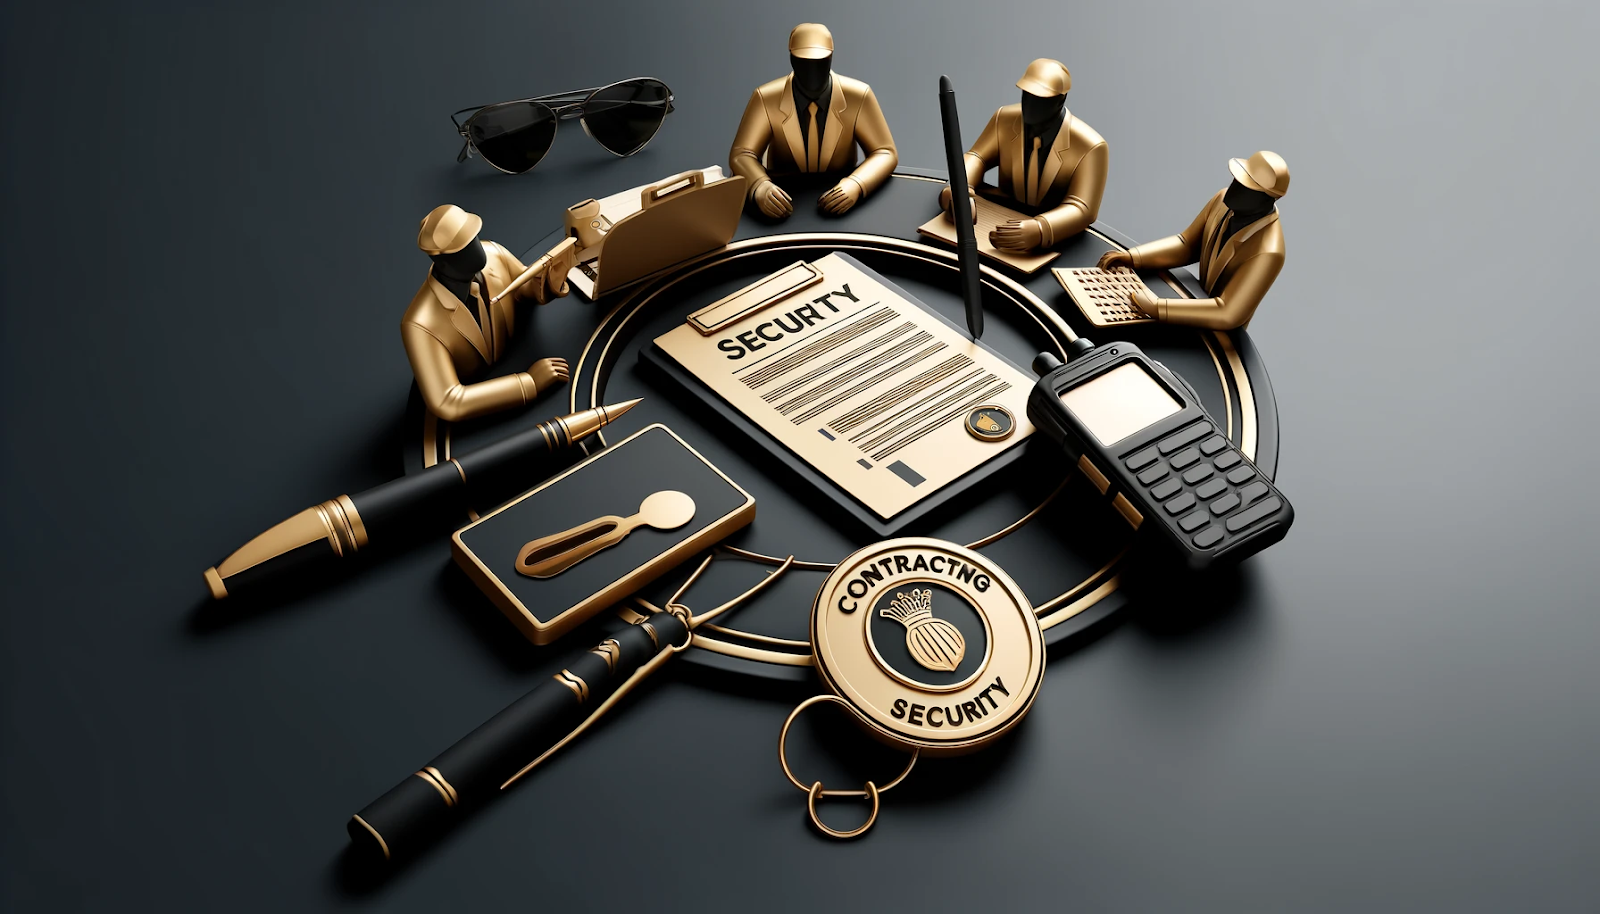 A professional setting with a meeting table, security documents, badge, and walkie-talkie in black and gold, symbolizing collaboration in event security planning.